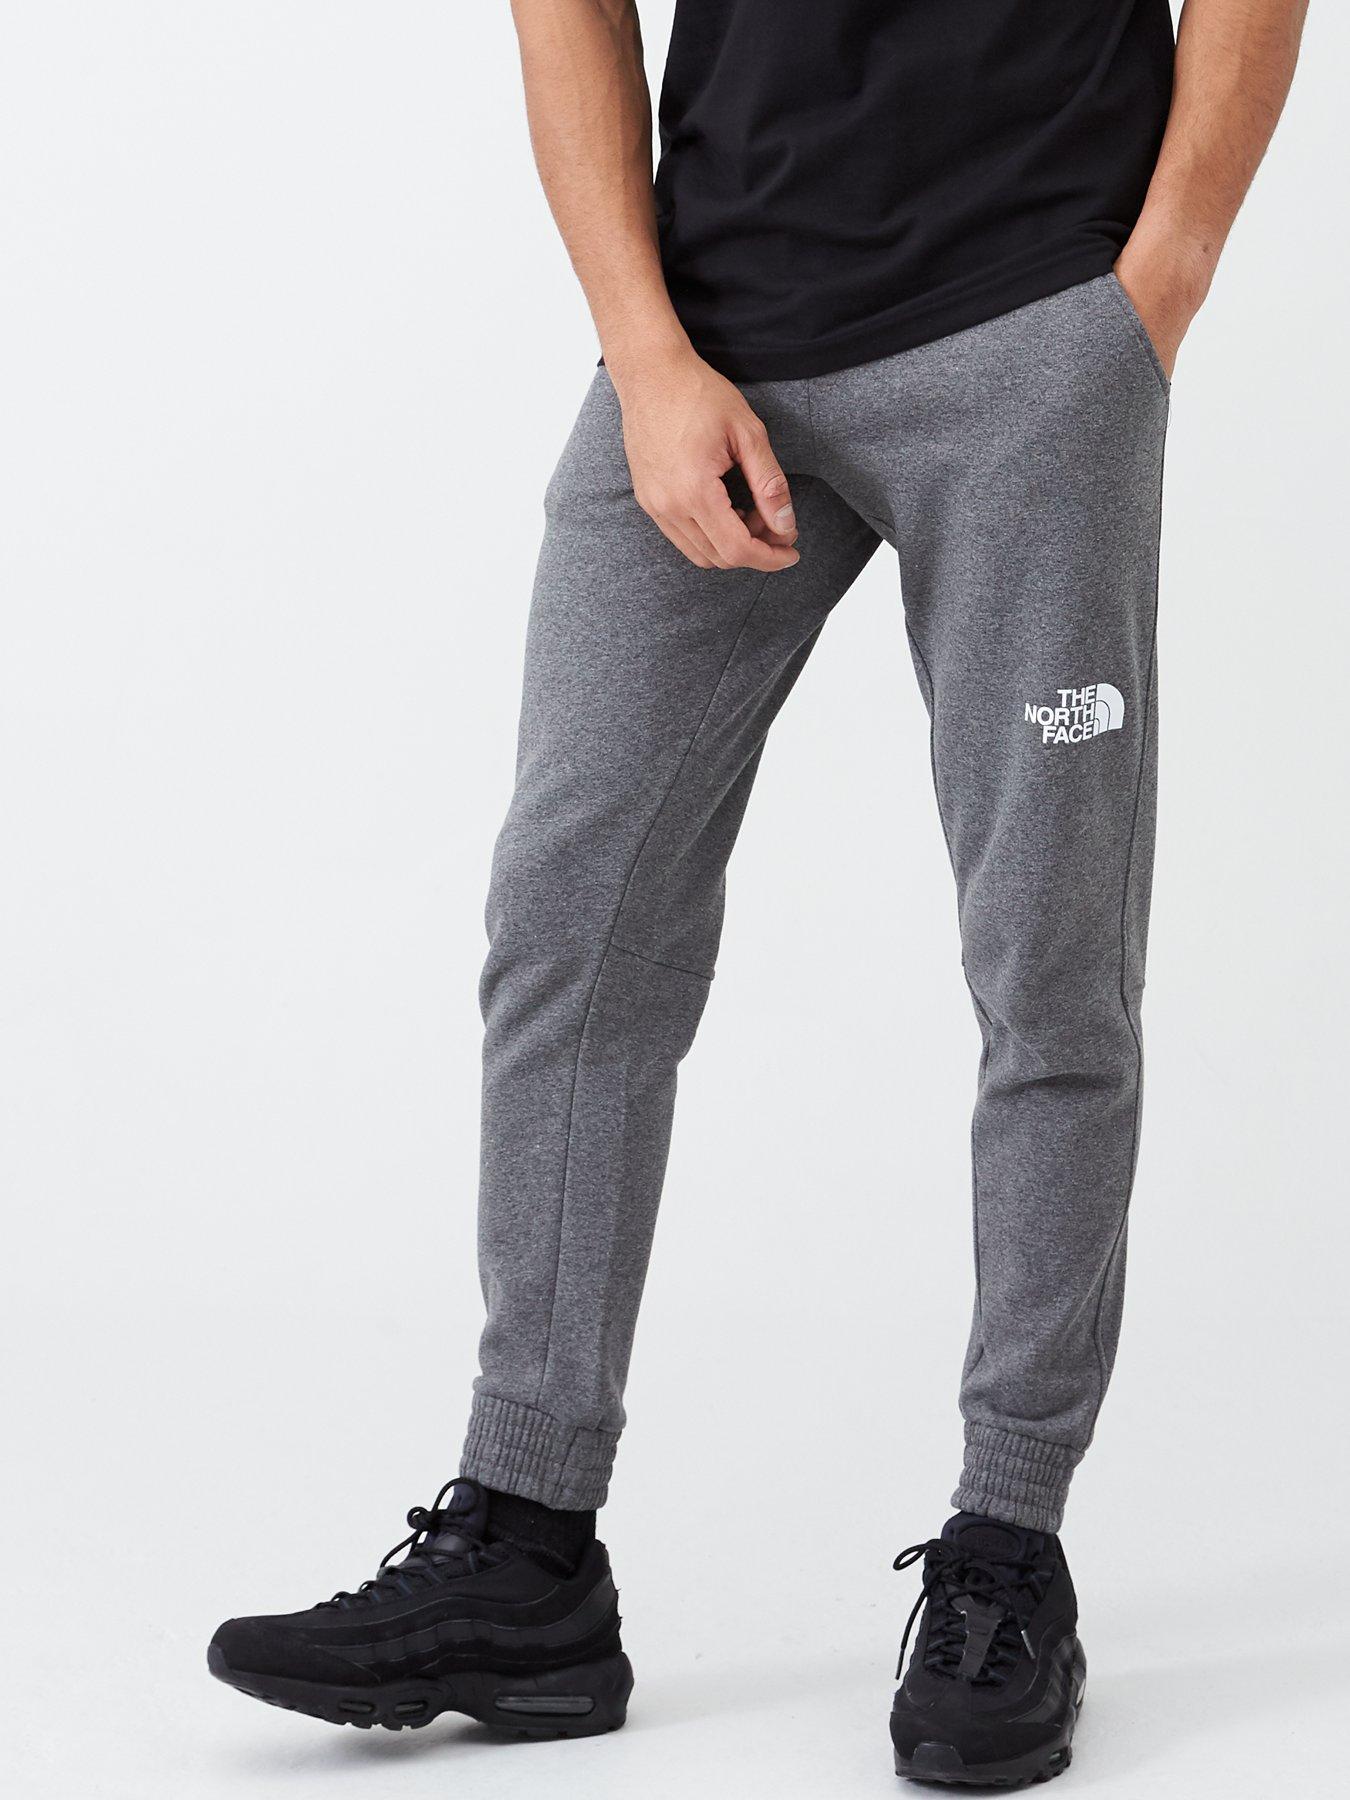 north face grey bottoms